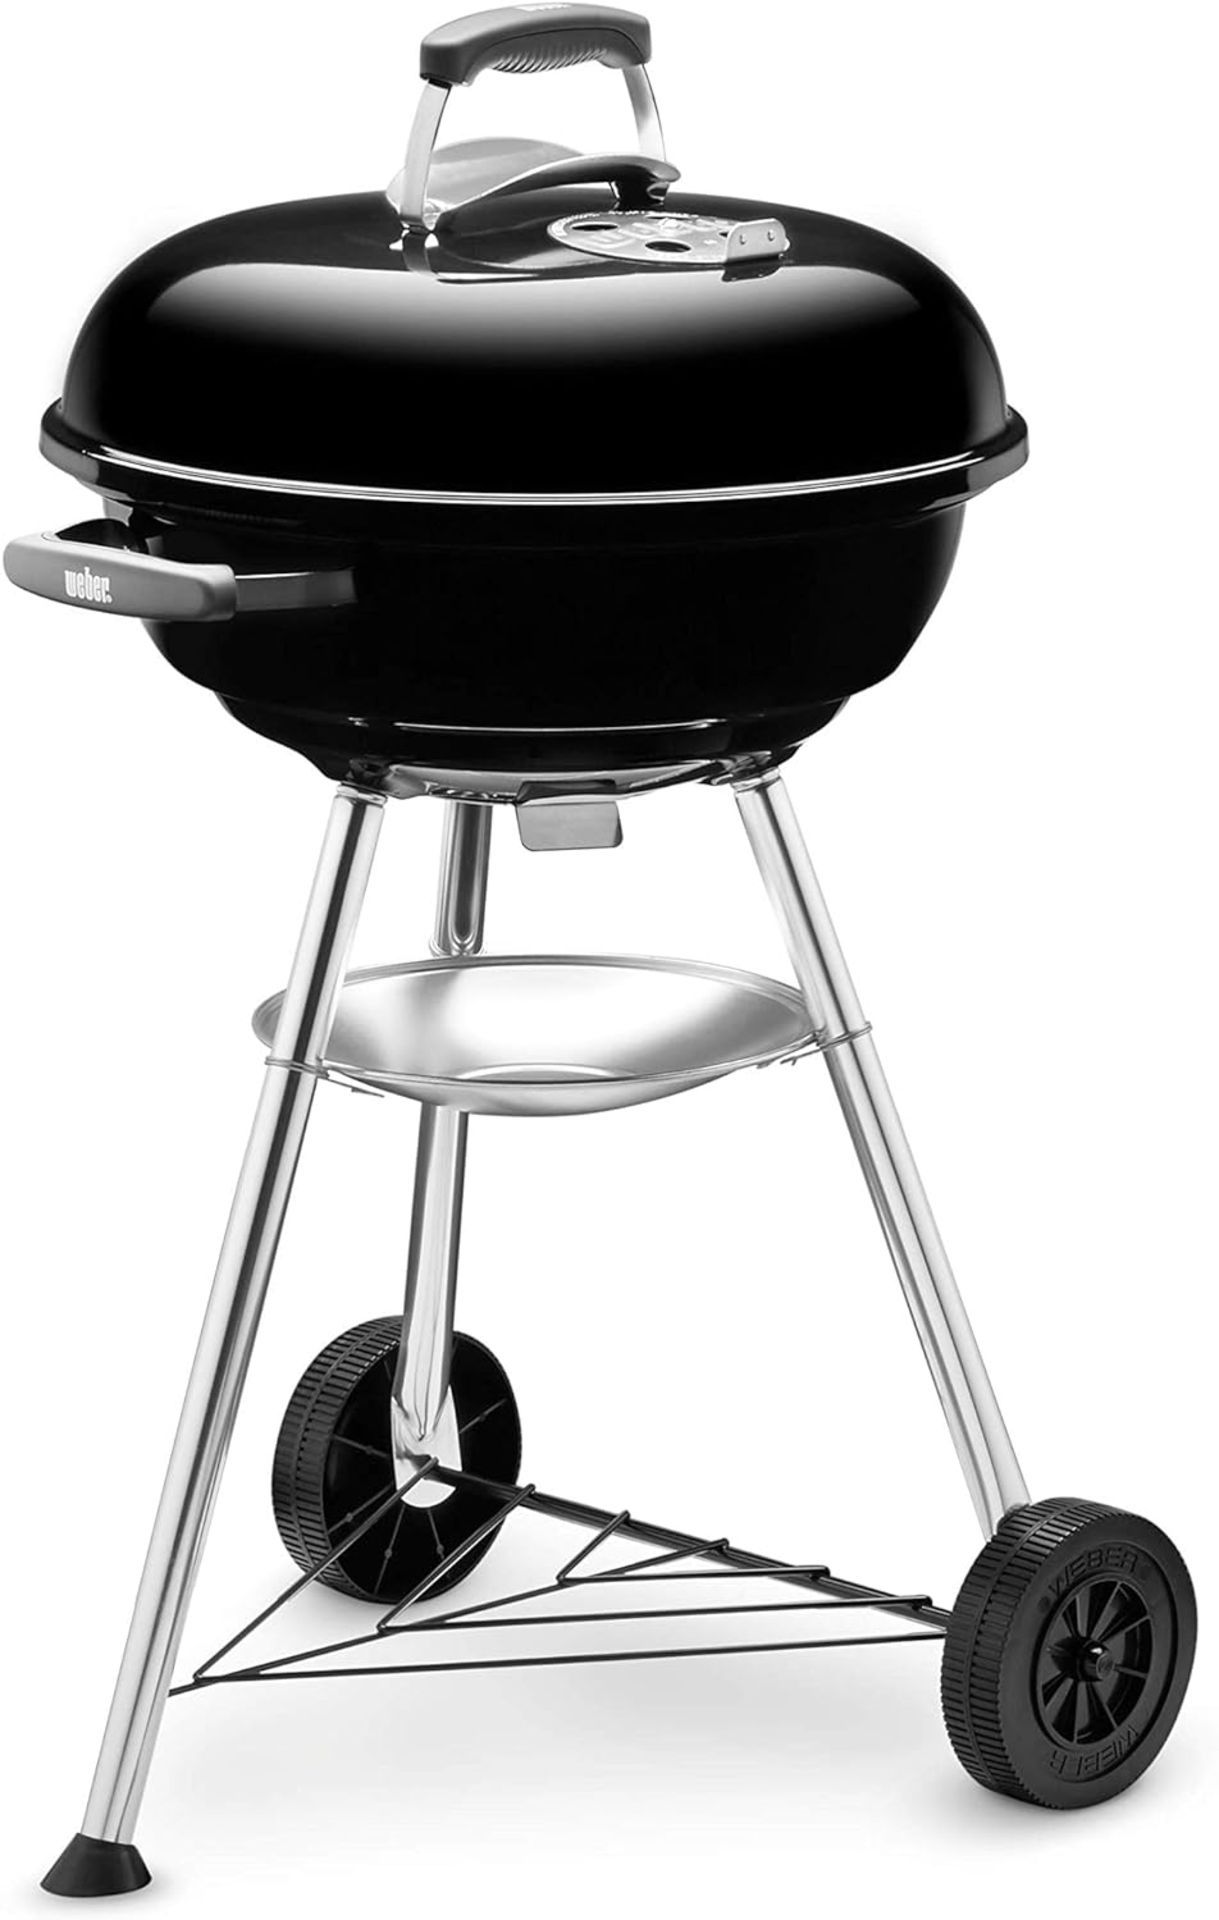 NEW & BOXED WEBER Compact 47cm Charcoal Barbecue. RRP £109.99 EACH. Whether sizzling hot dogs,